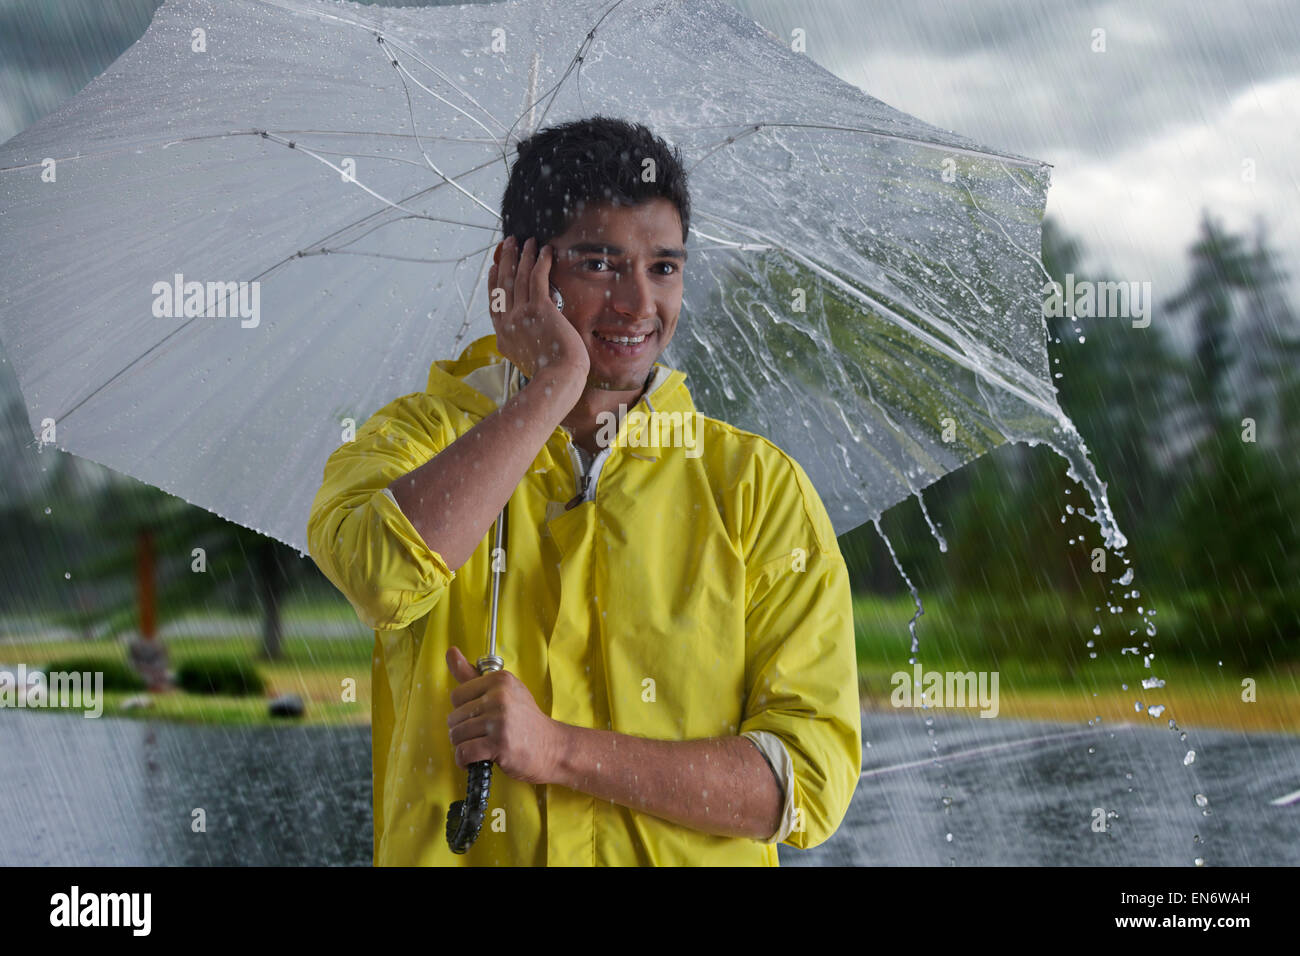 Man with umbrella talking on mobile phone Stock Photo